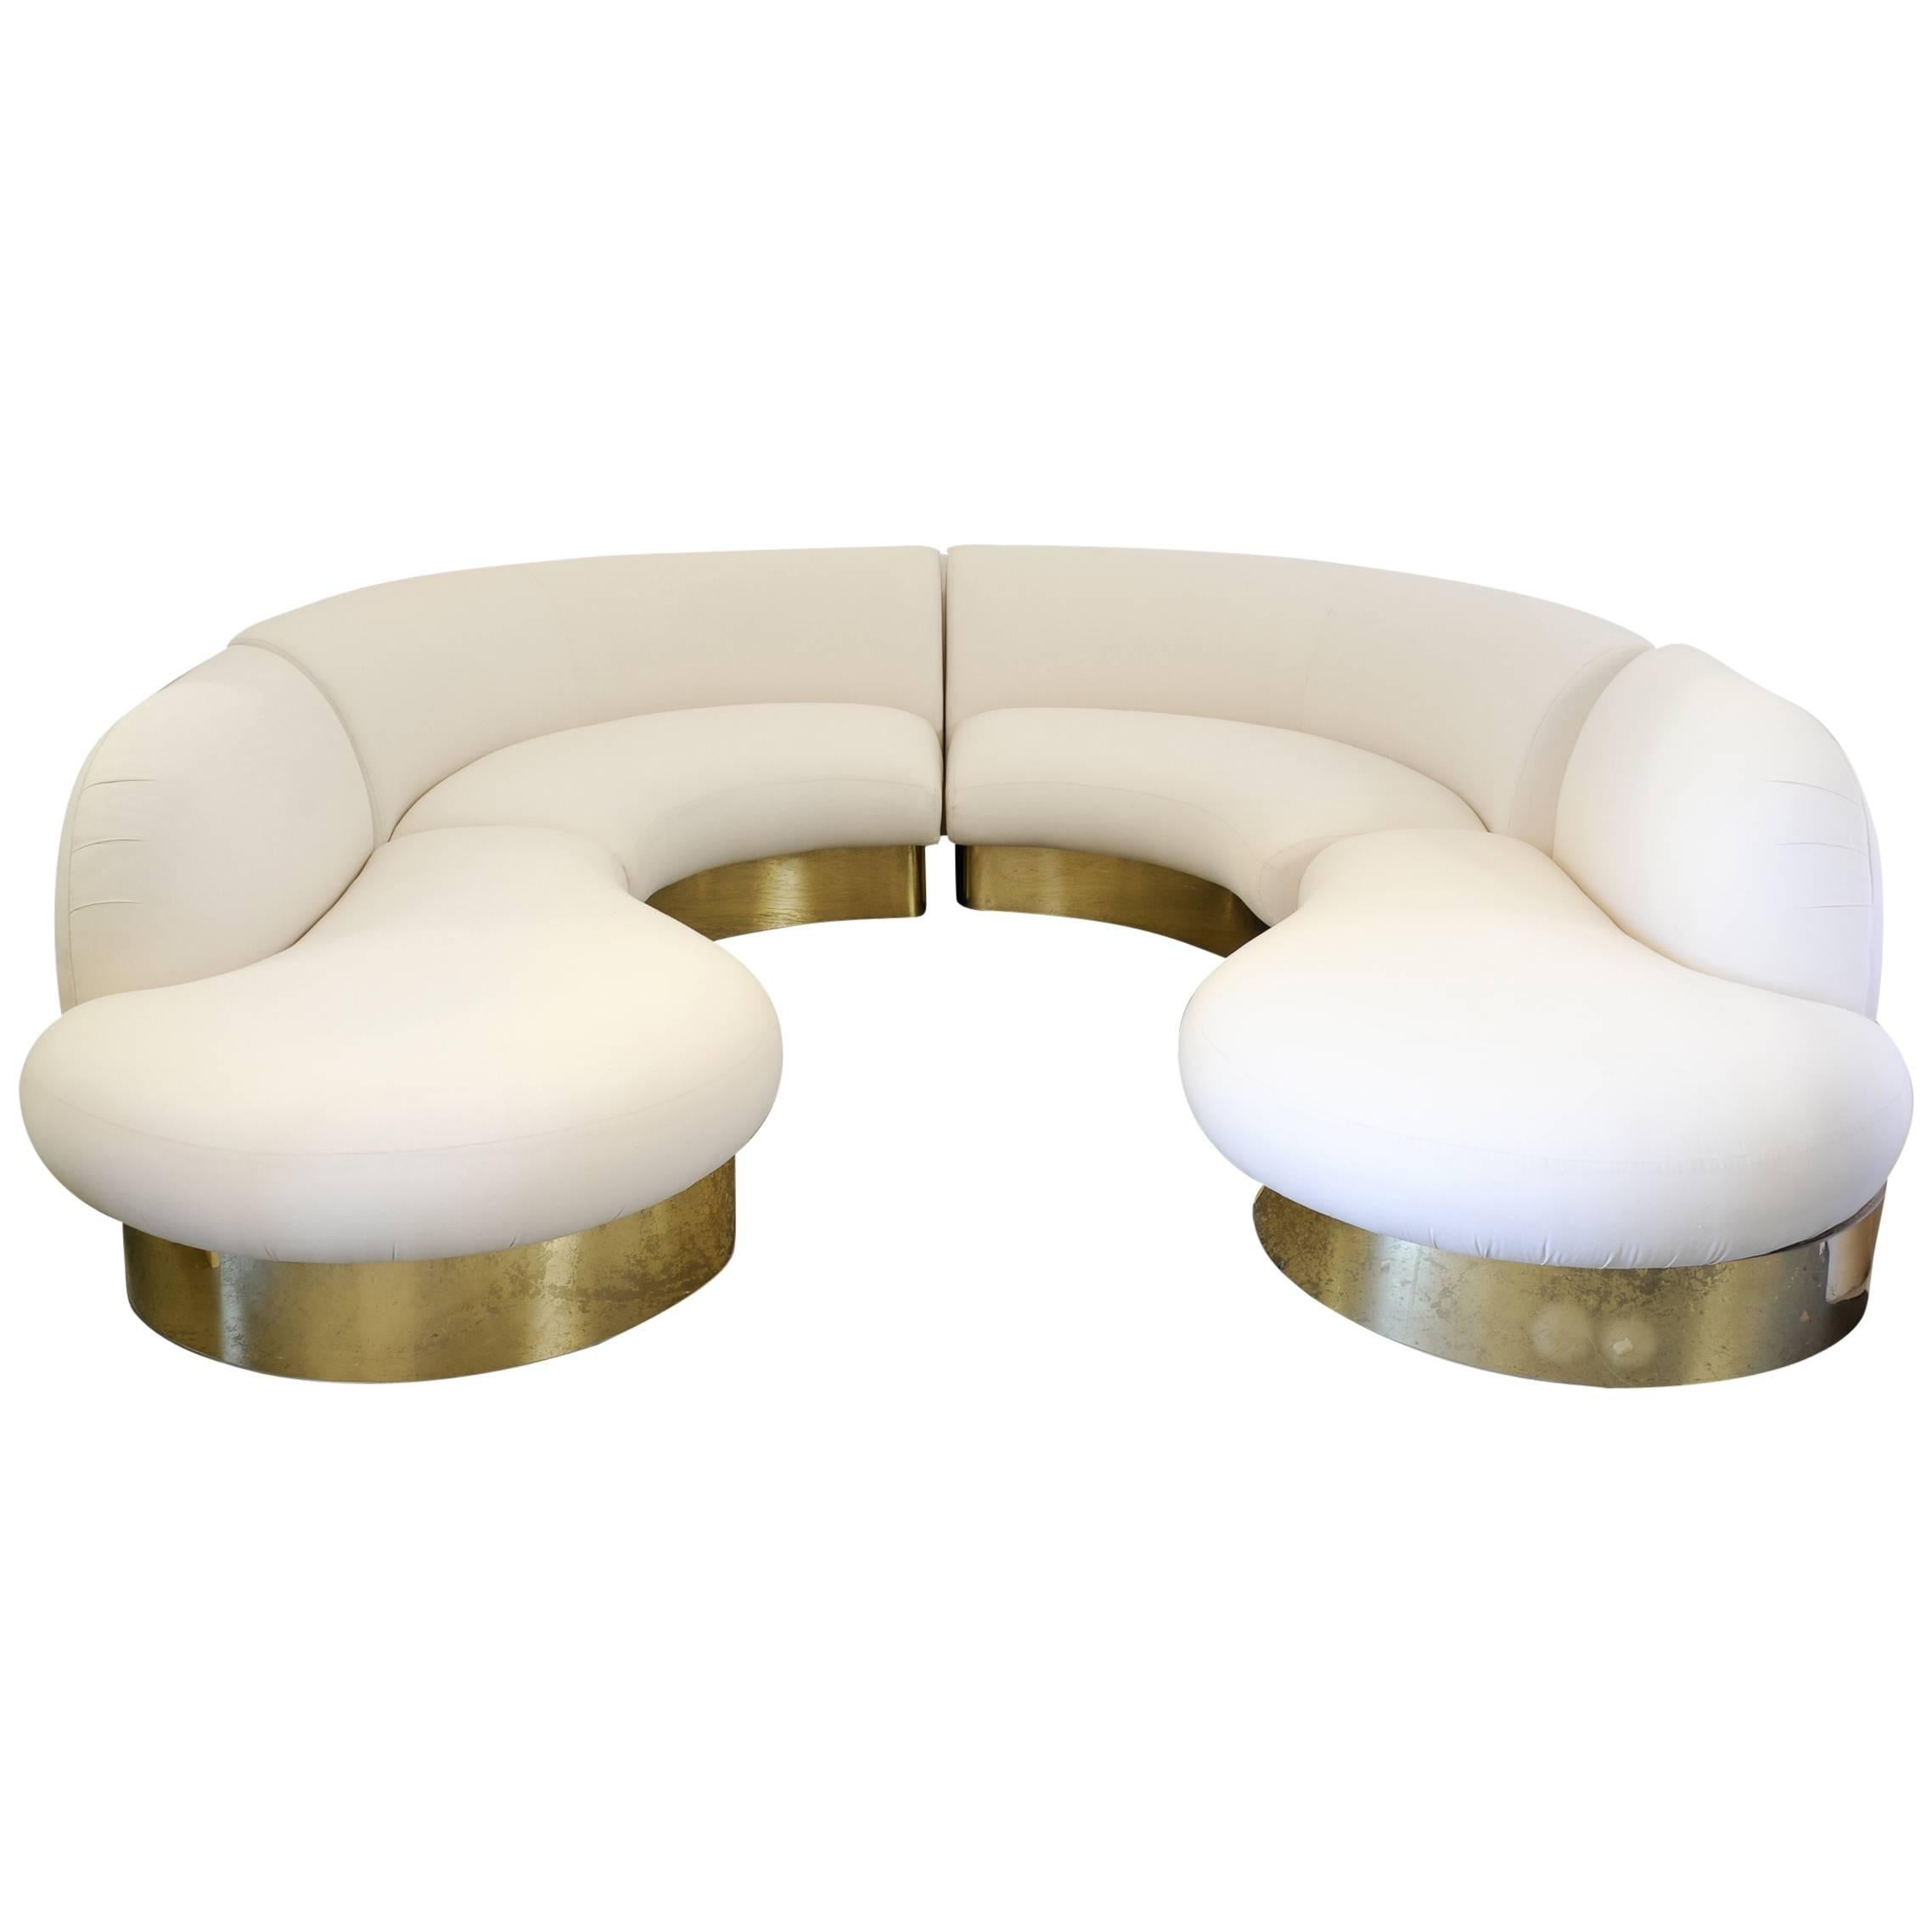 Milo Baughman for Thayer-Coggins Sectional Surround Sofa with Brass Base For Sale